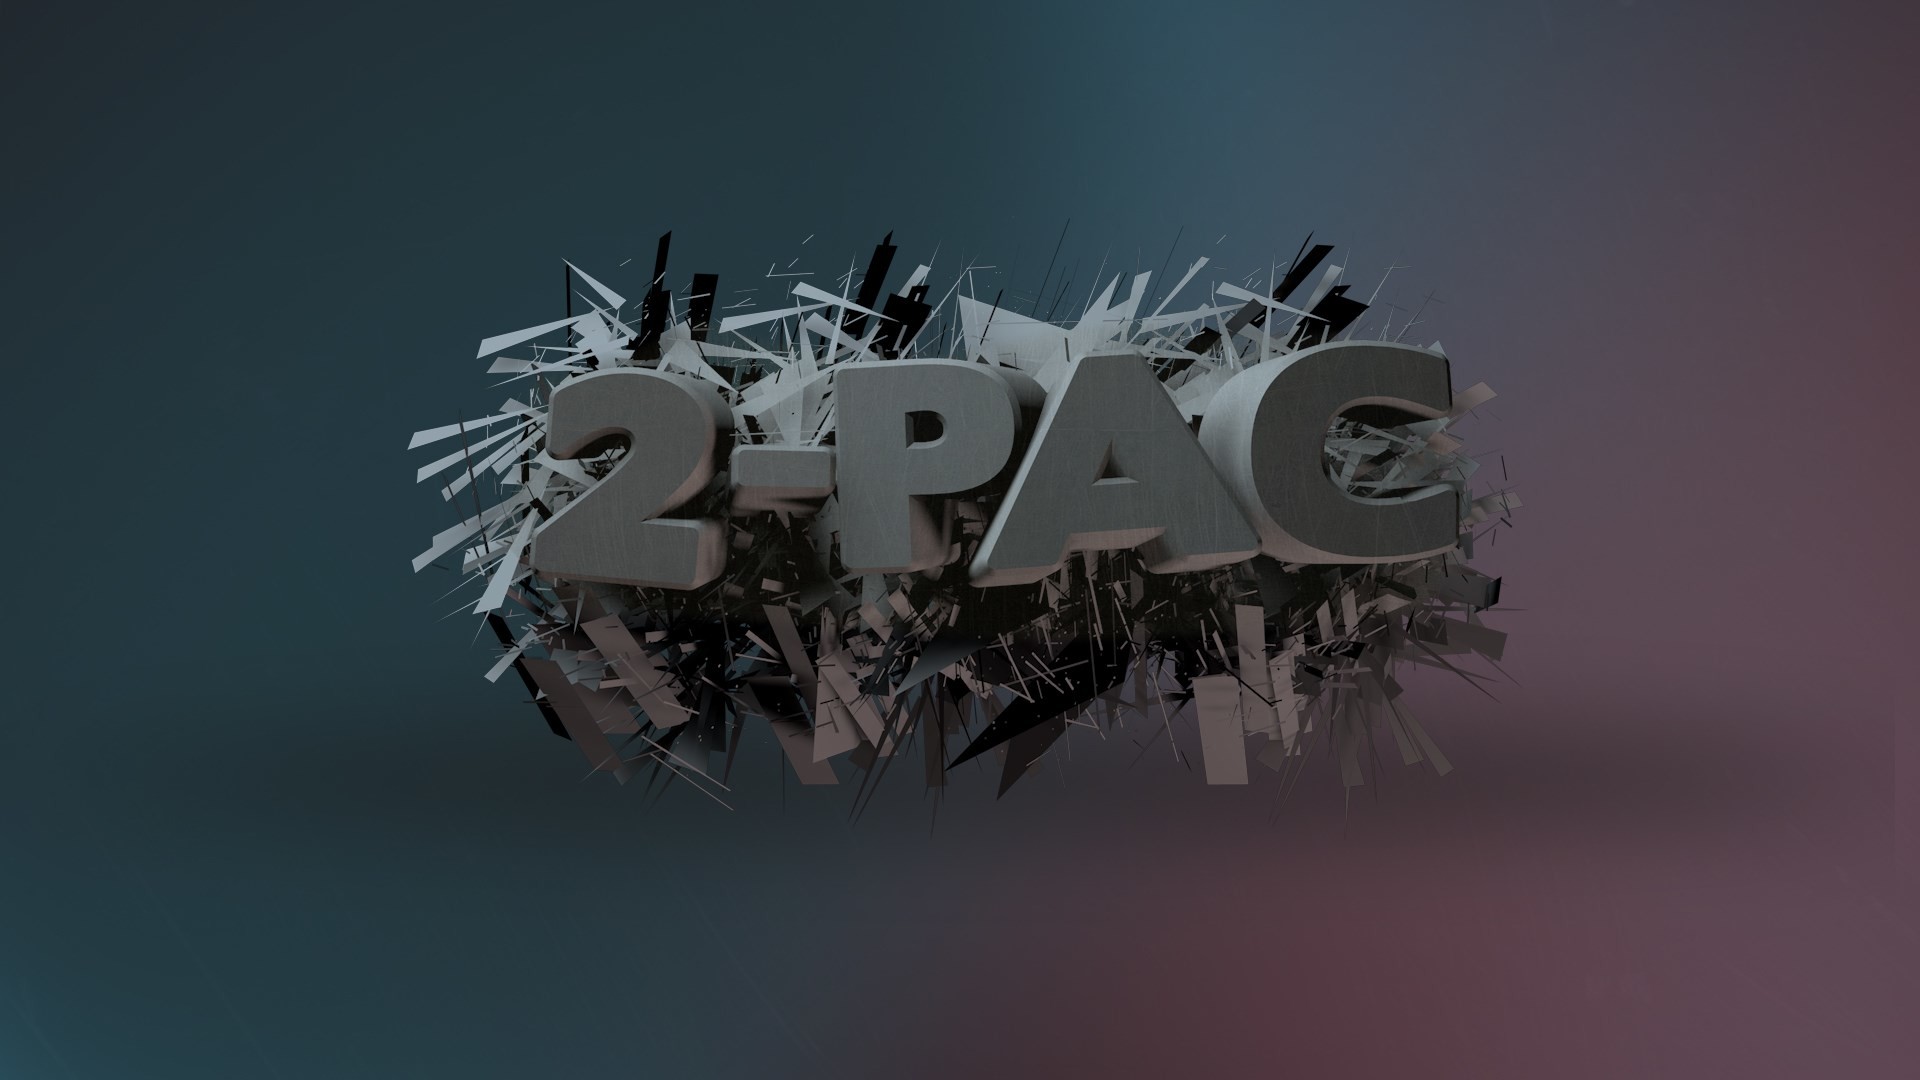 1920x1080 2pac backgrounds